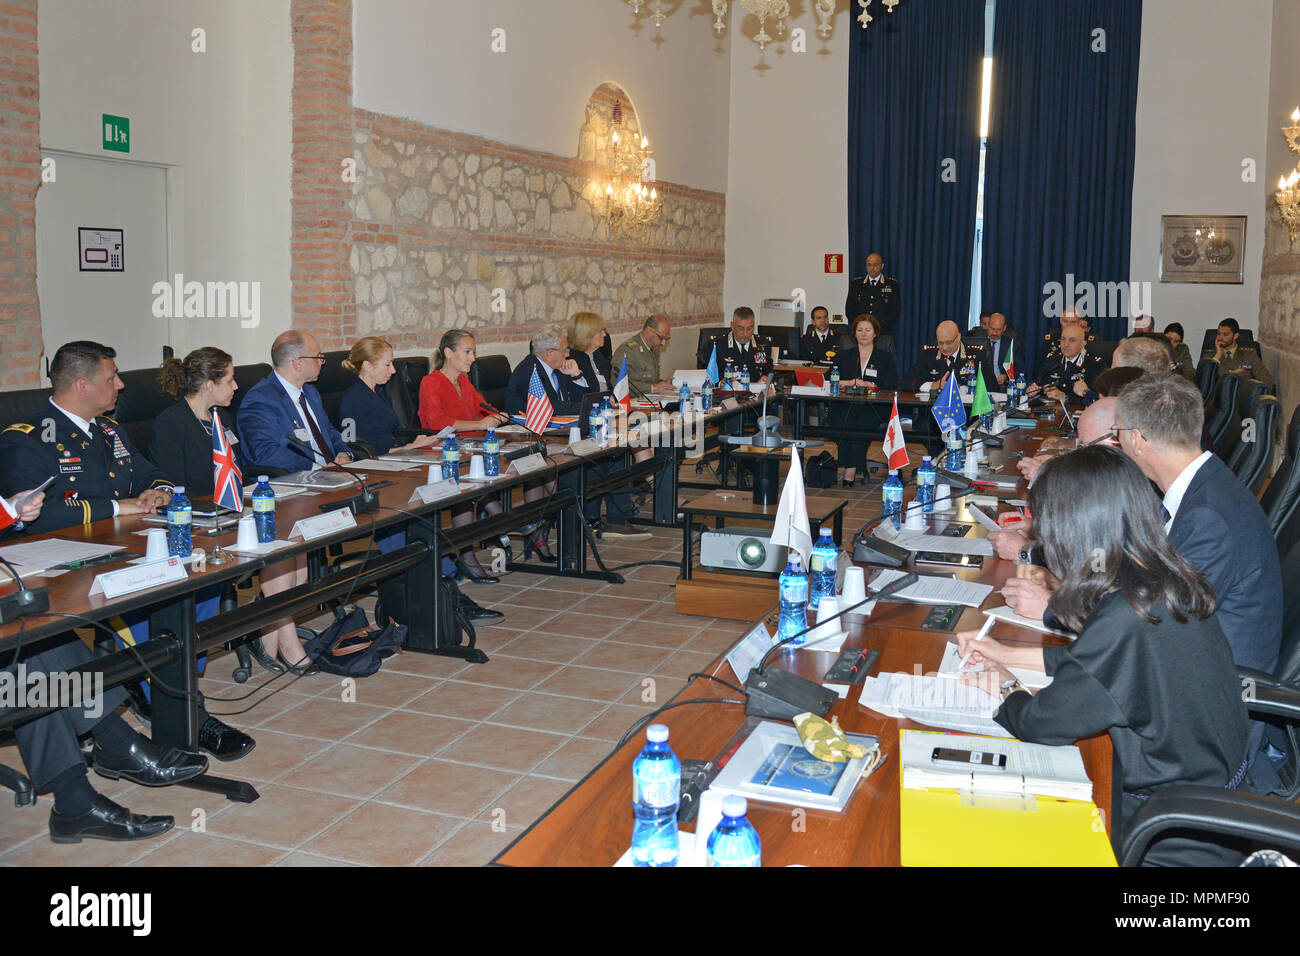 U.S. Army Col. Darius S. Gallegos, CoESPU deputy director and Ms. Kelly Degnan, Charge’ d’Affaires ad interim U.S. Embassy & Consulates Italy,  during a meeting with the G7 at Center of Excellence for Stability Police Units (CoESPU) Vicenza, Italy, Mar. 30, 2017.(U.S. Army Photo by Visual Information Specialist Antonio Bedin/released) Stock Photo